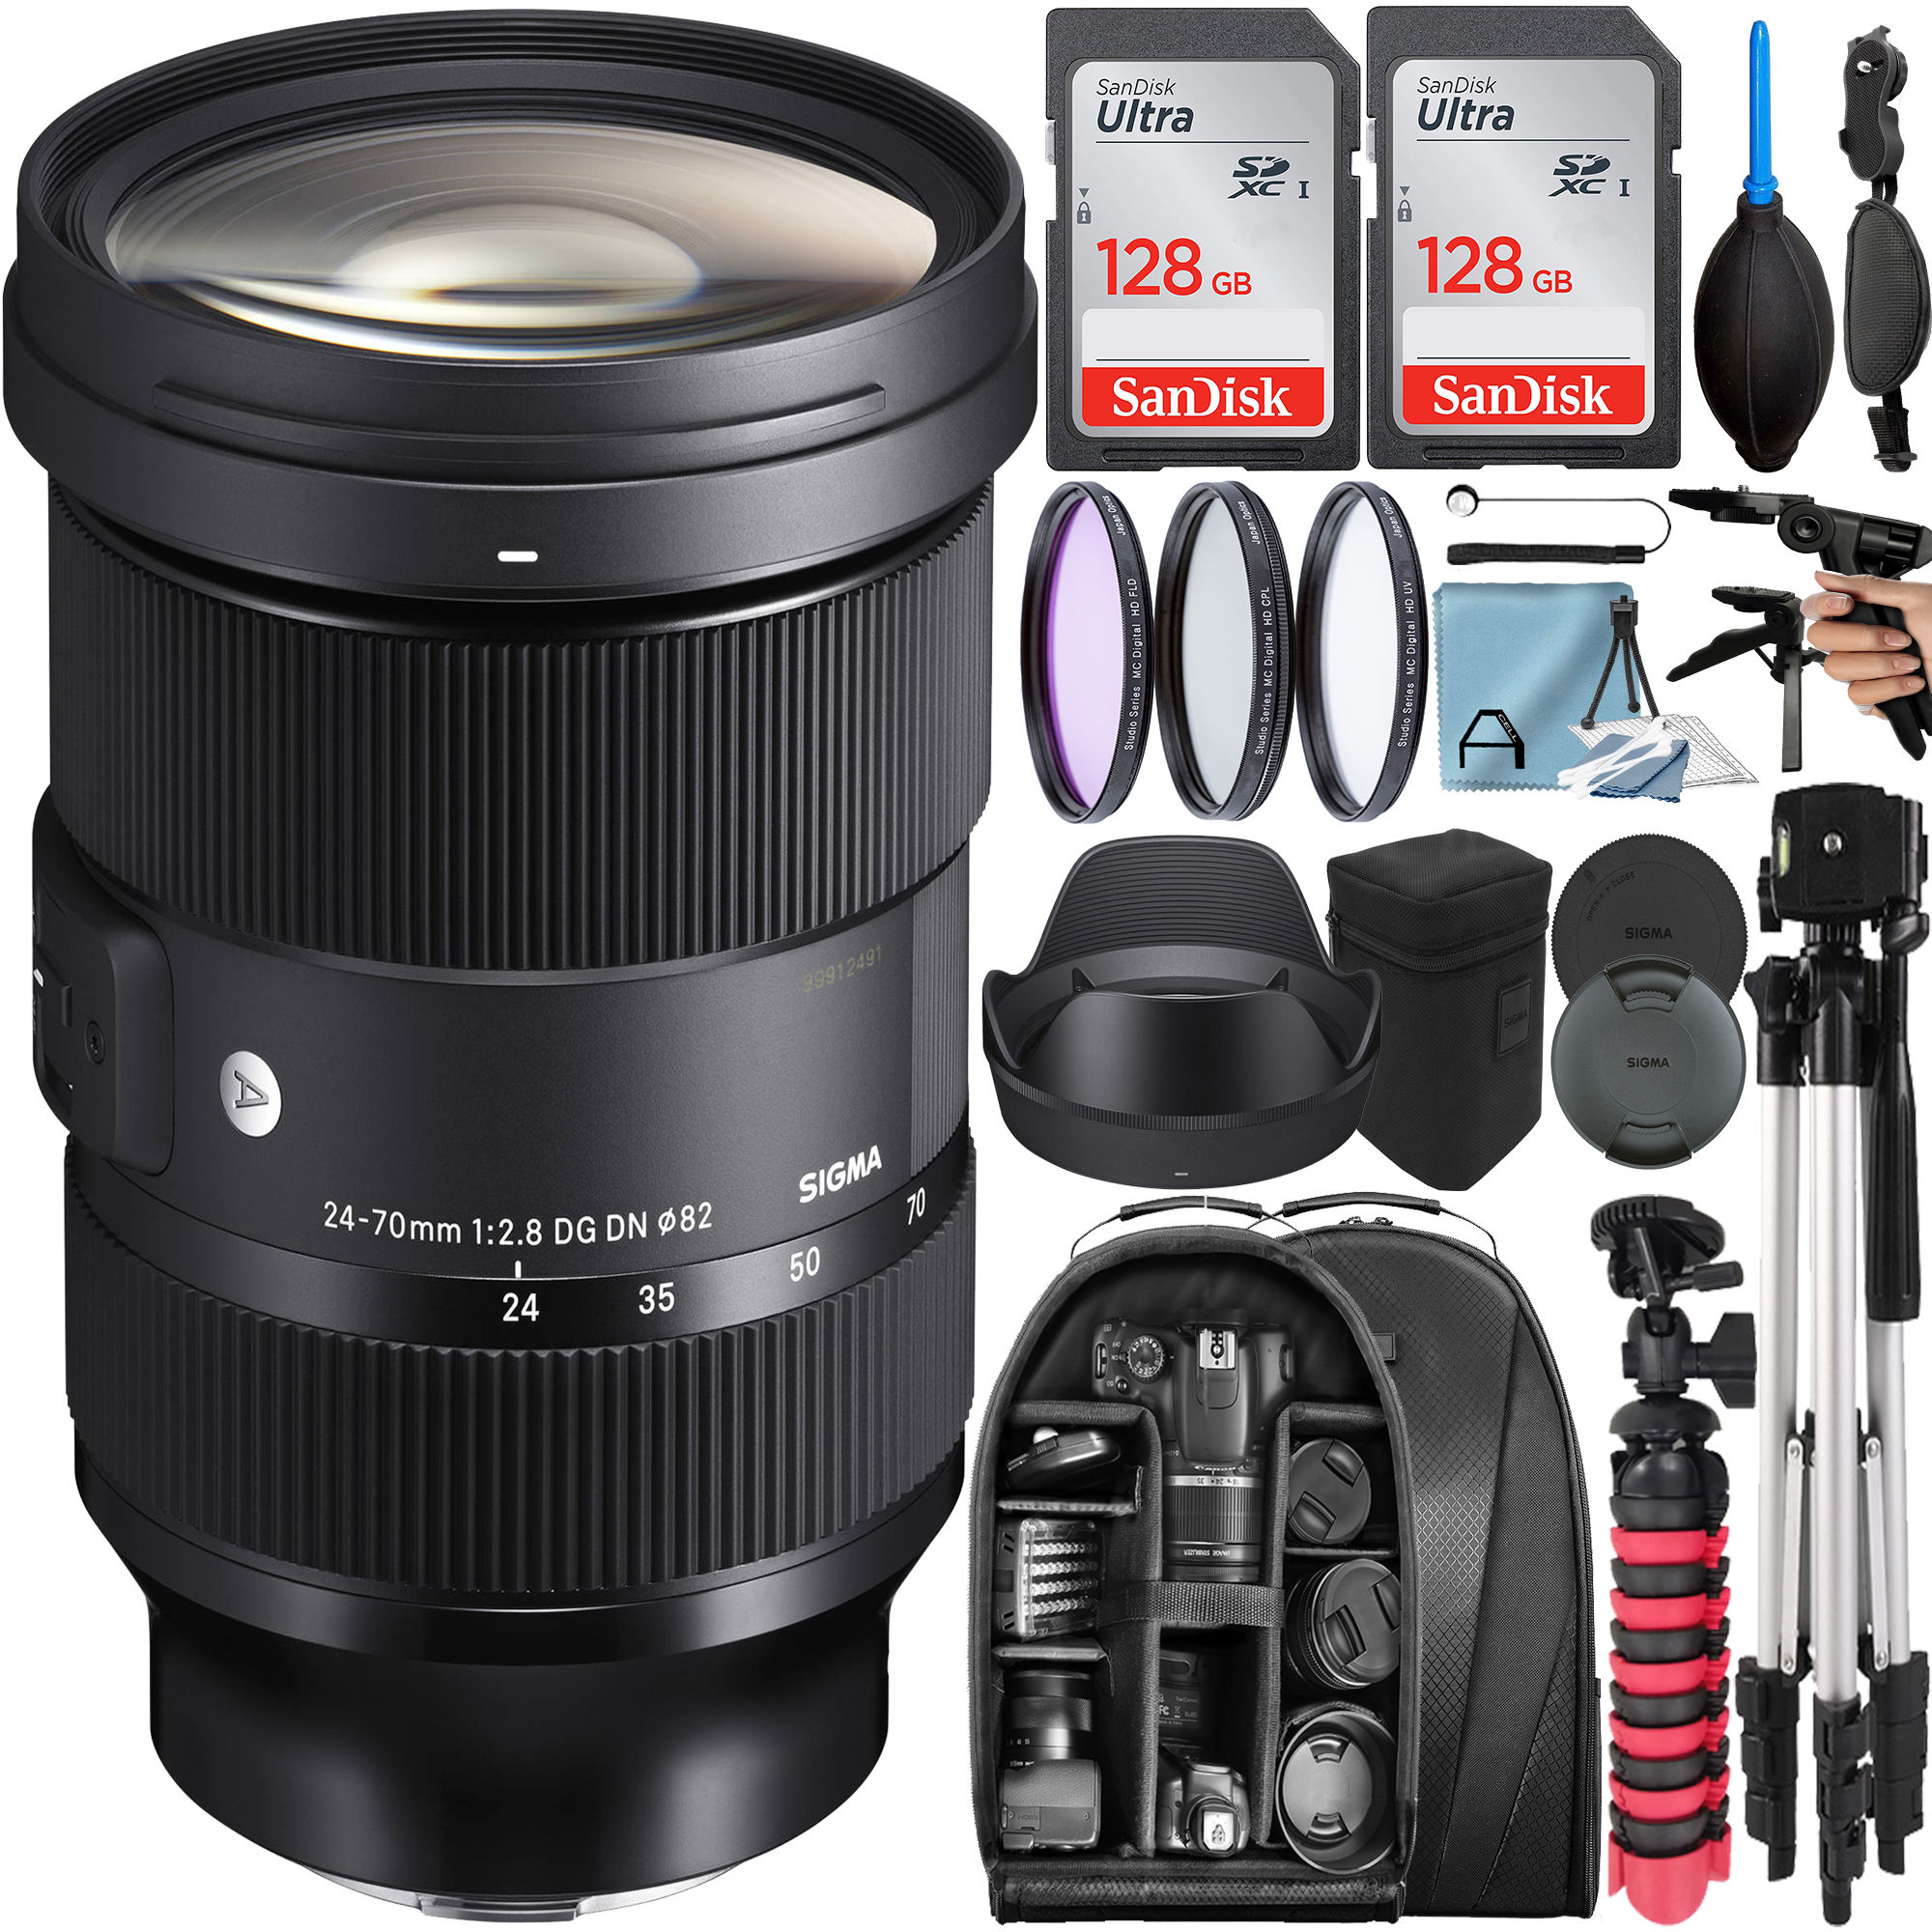 Sigma 24-70mm f/2.8 DG DN Art Lens for Sony E with 2 Pack 128GB SanDisk Memory Card + Tripod + Backpack + A-Cell Accessory Bundle